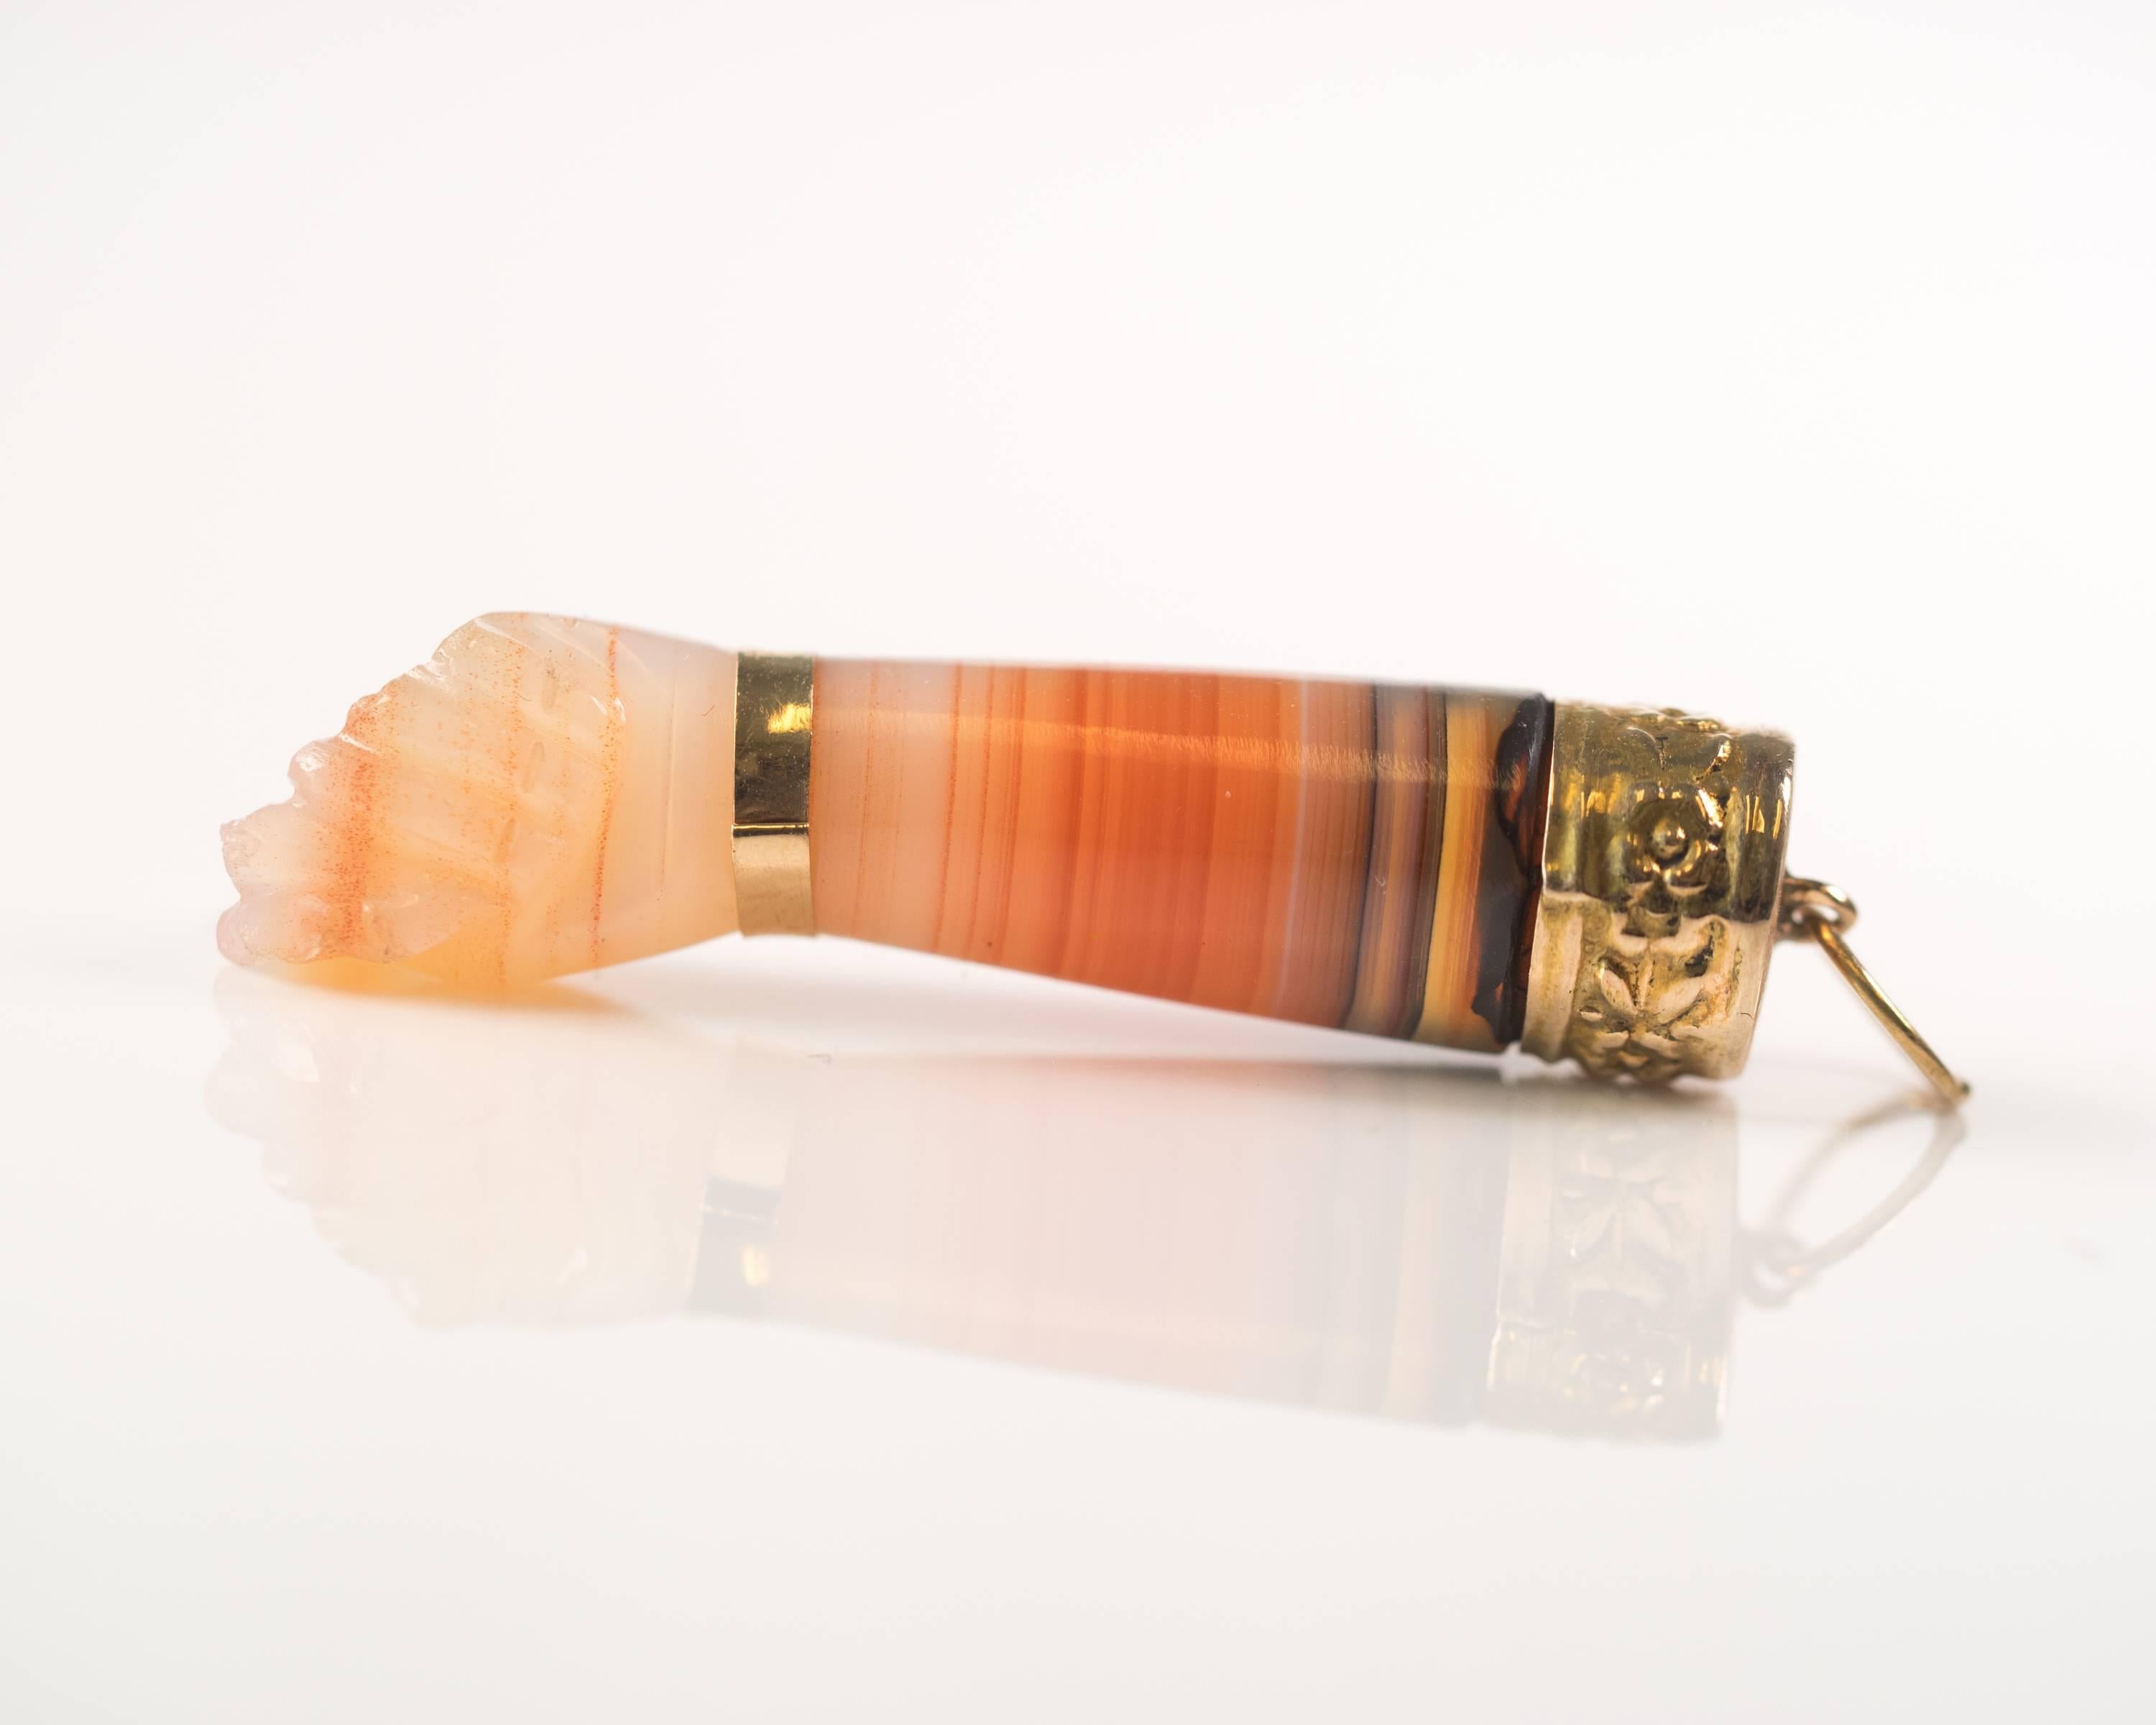 1950s Retro Mano Figa Pendant Charm - 18 Karat Yellow Gold, Translucent Earth Tone Striated Agate

Features translucent striated agate in earth tones graduating from deep charcoal amber to terracotta to creamy pink tones. A band of rich, high polish